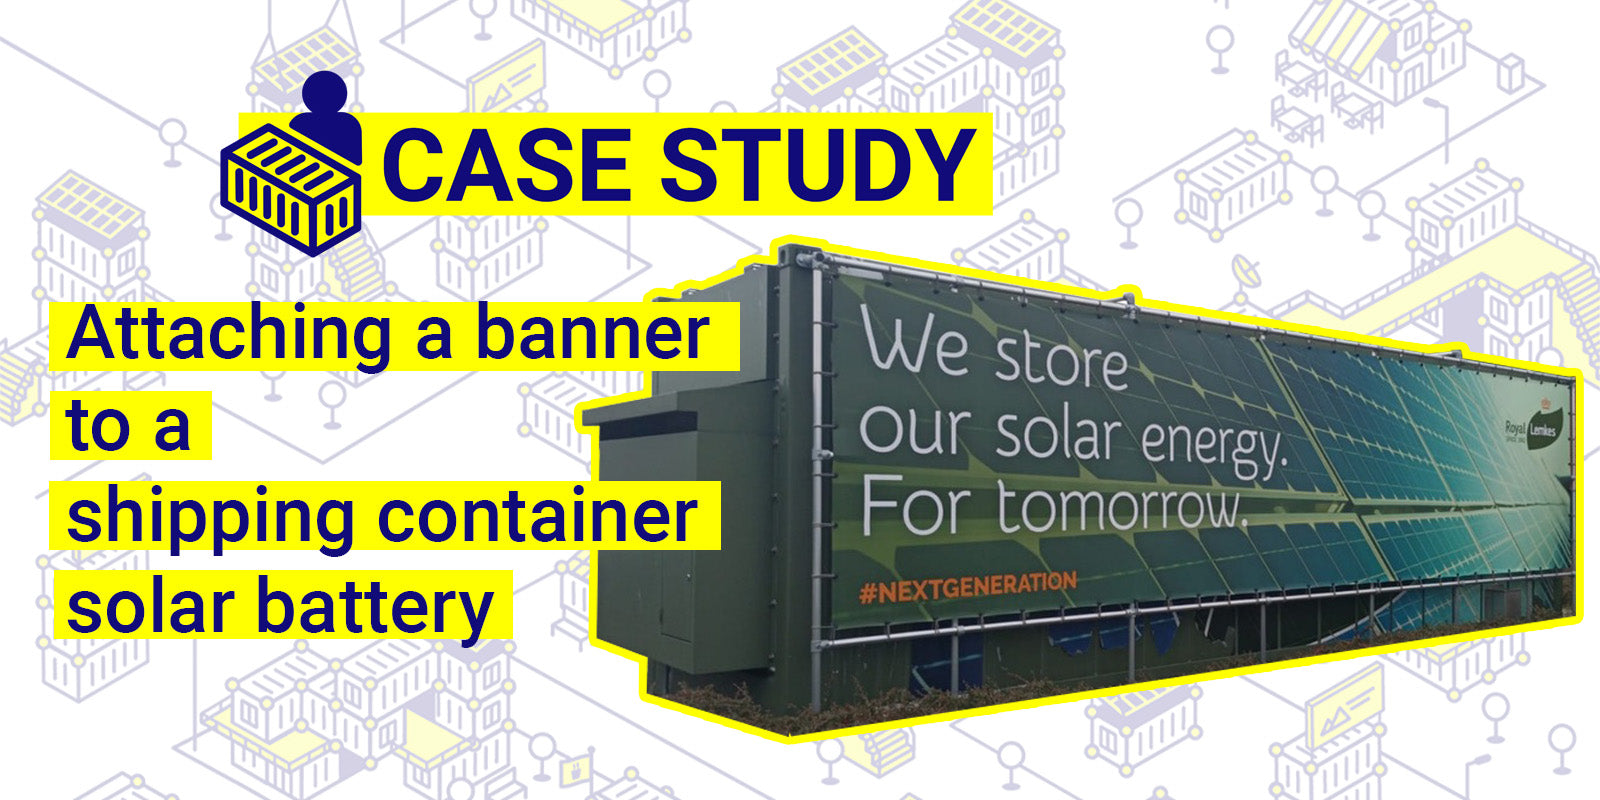 Attaching a banner to a shipping container solar battery